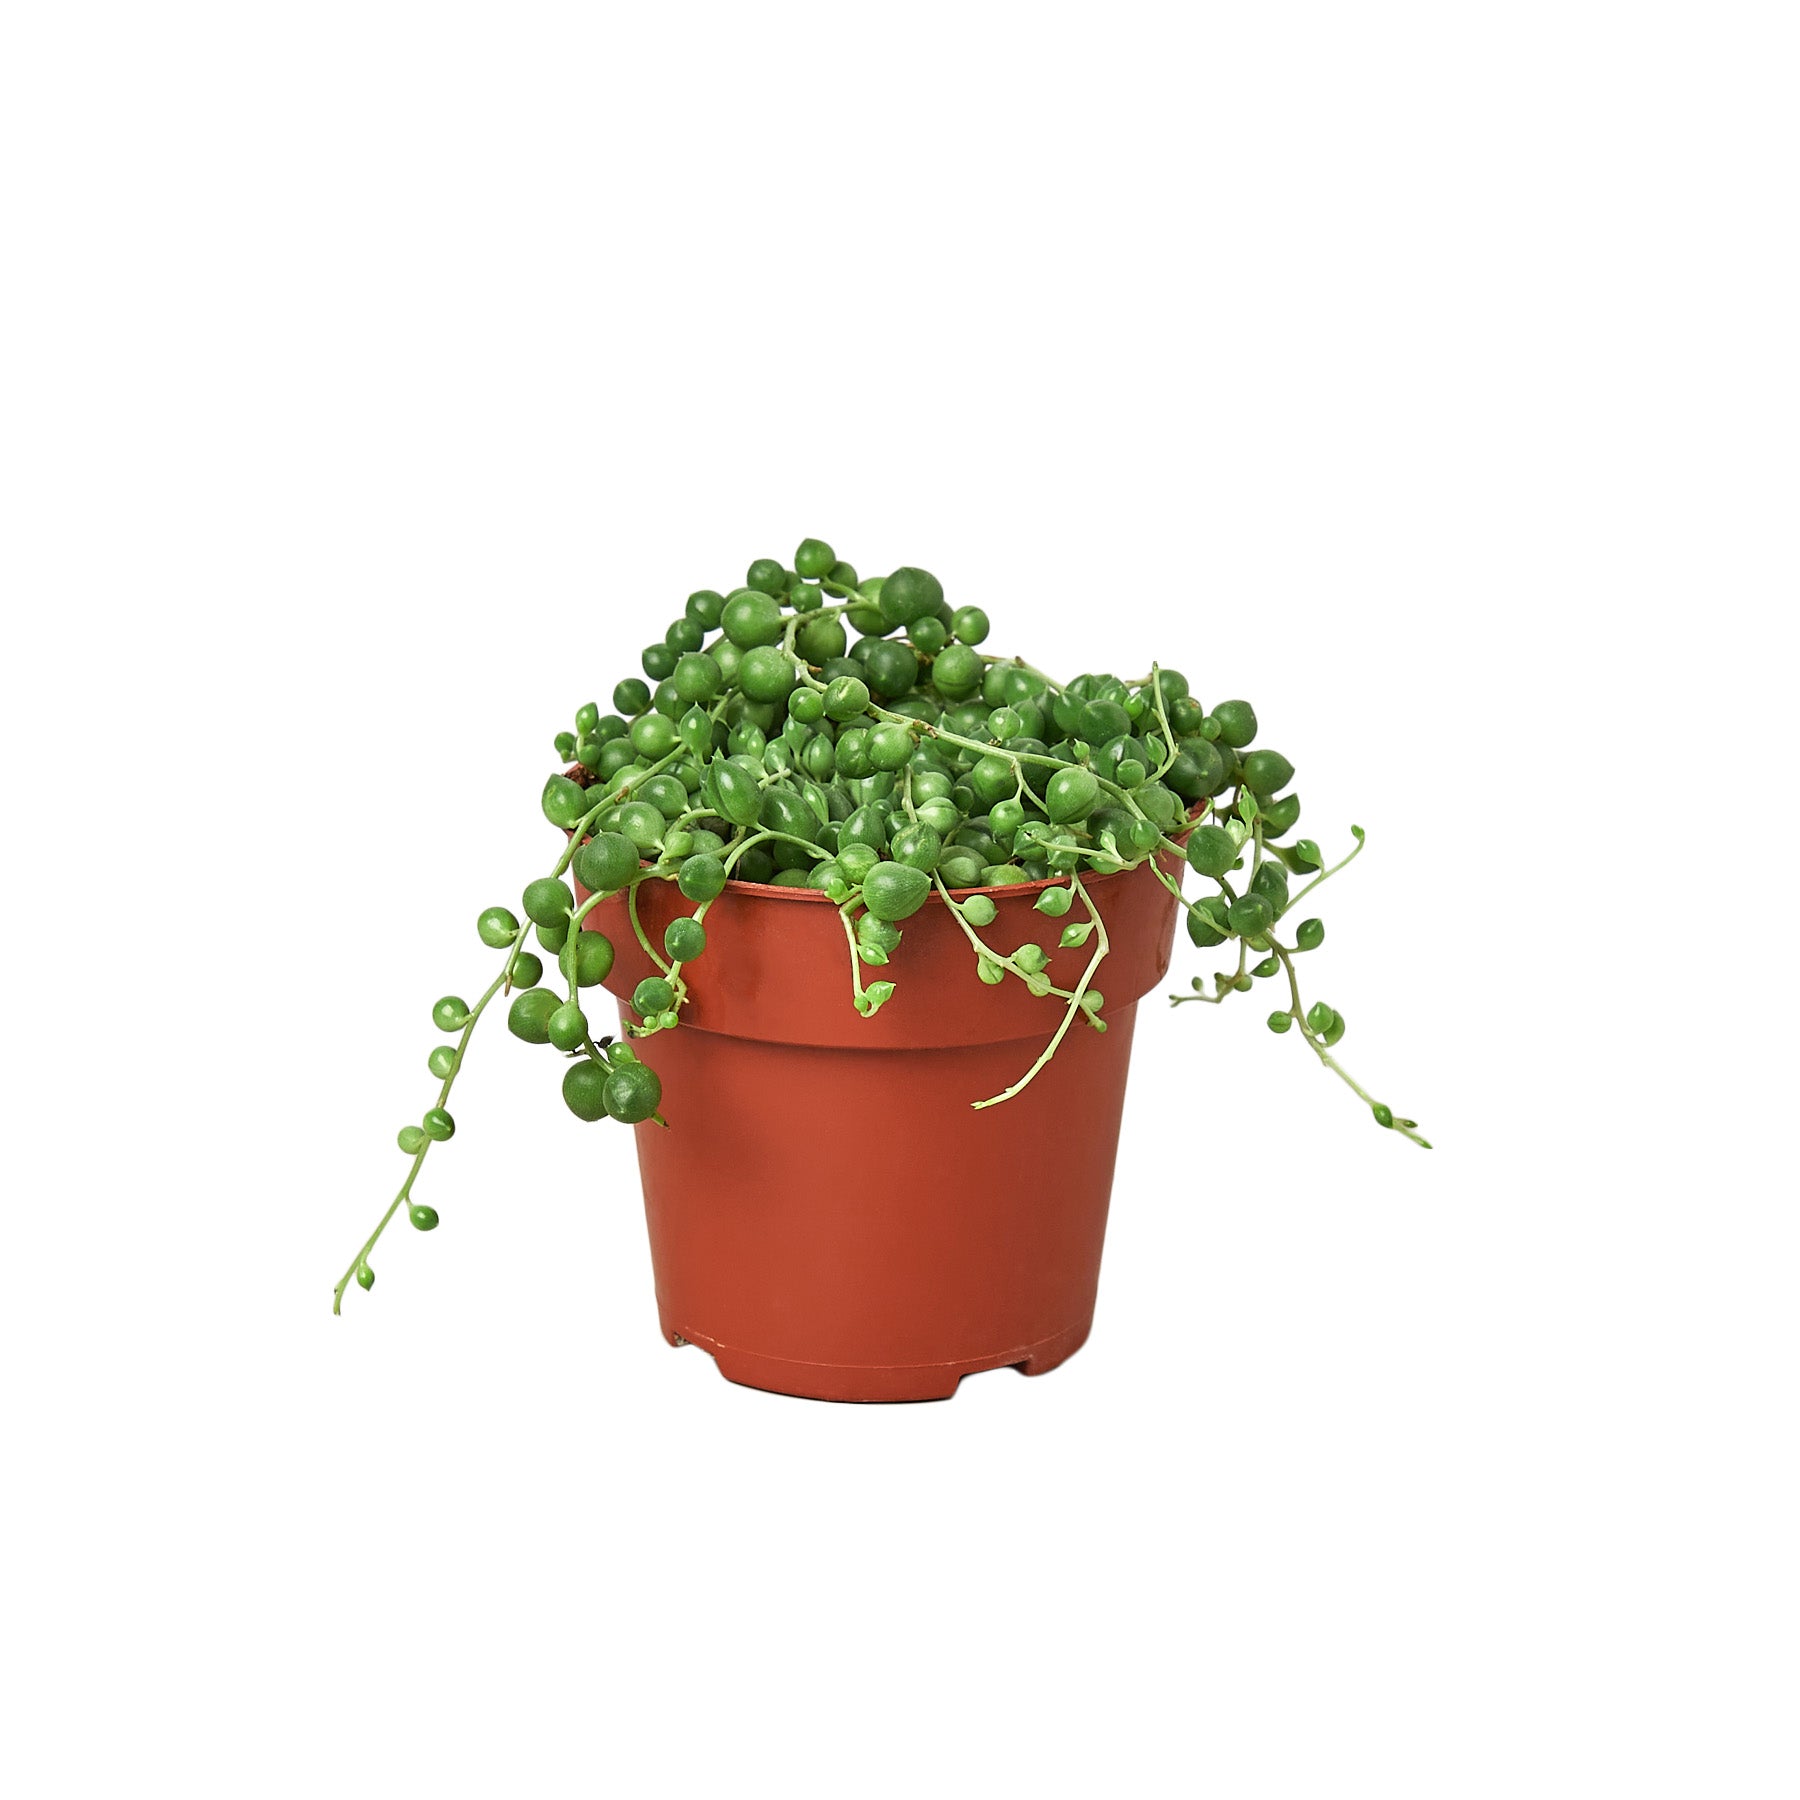 A green plant in a pot on a white background at a garden center near me.